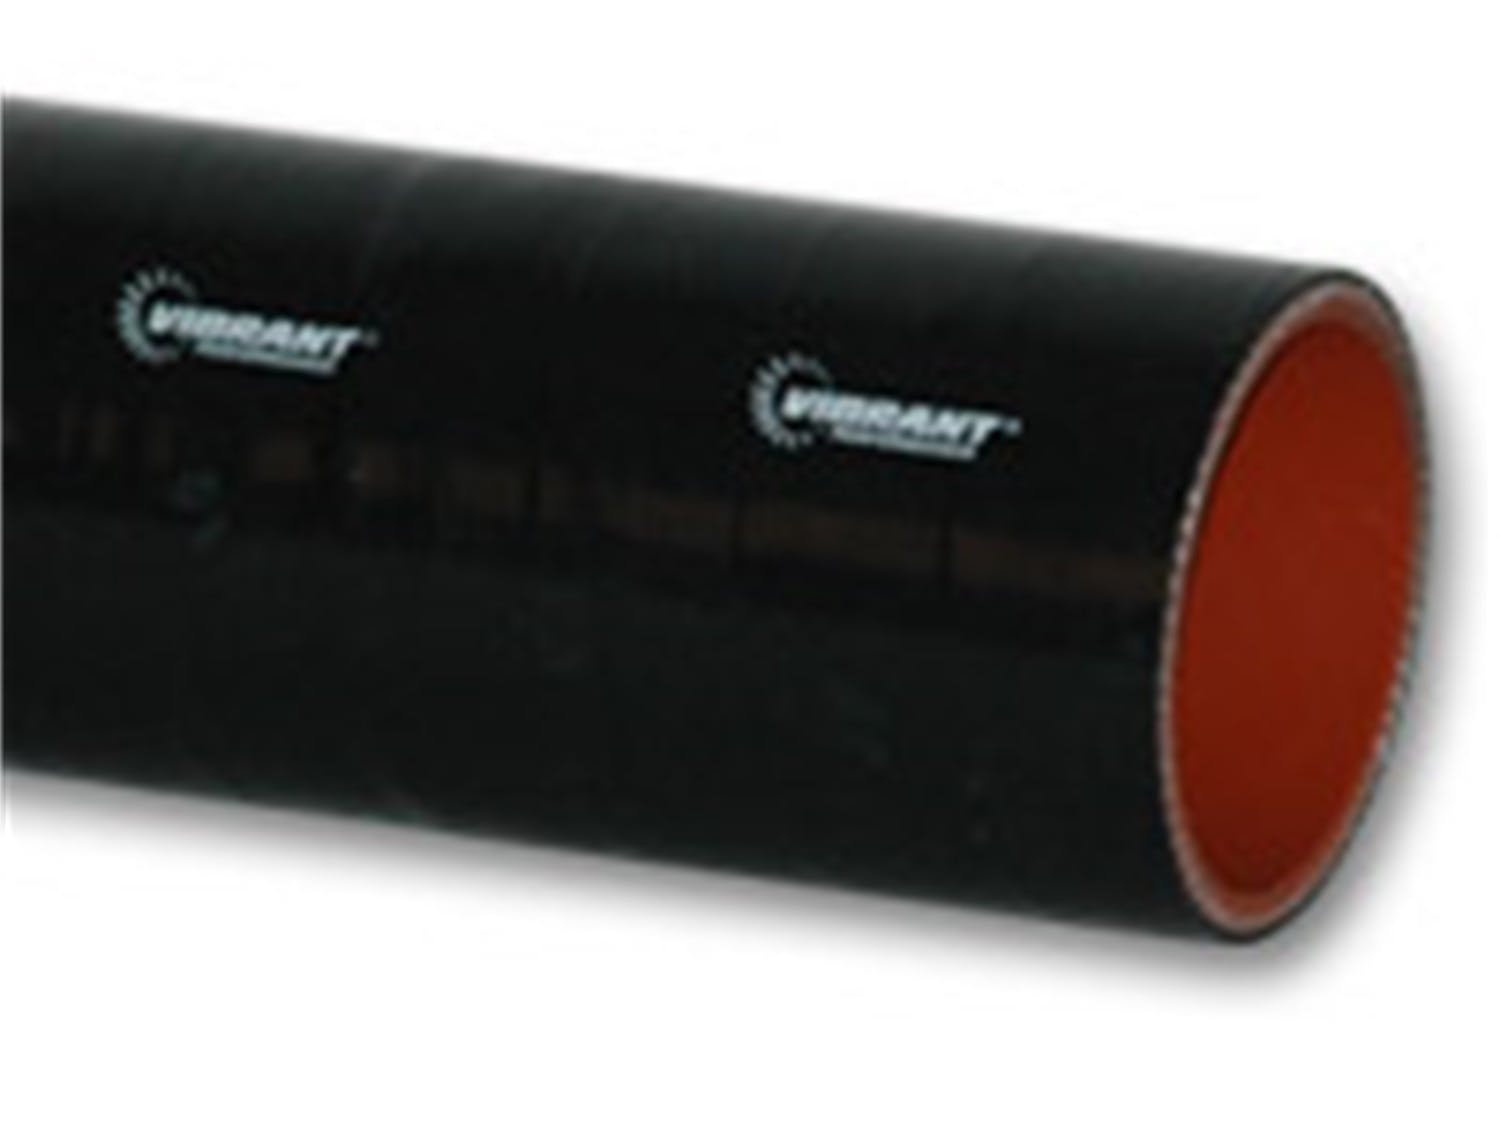 Vibrant Performance 2709 4 Ply Silicone Sleeve, 2.25 inch I.D. x 36 inch Long - Black